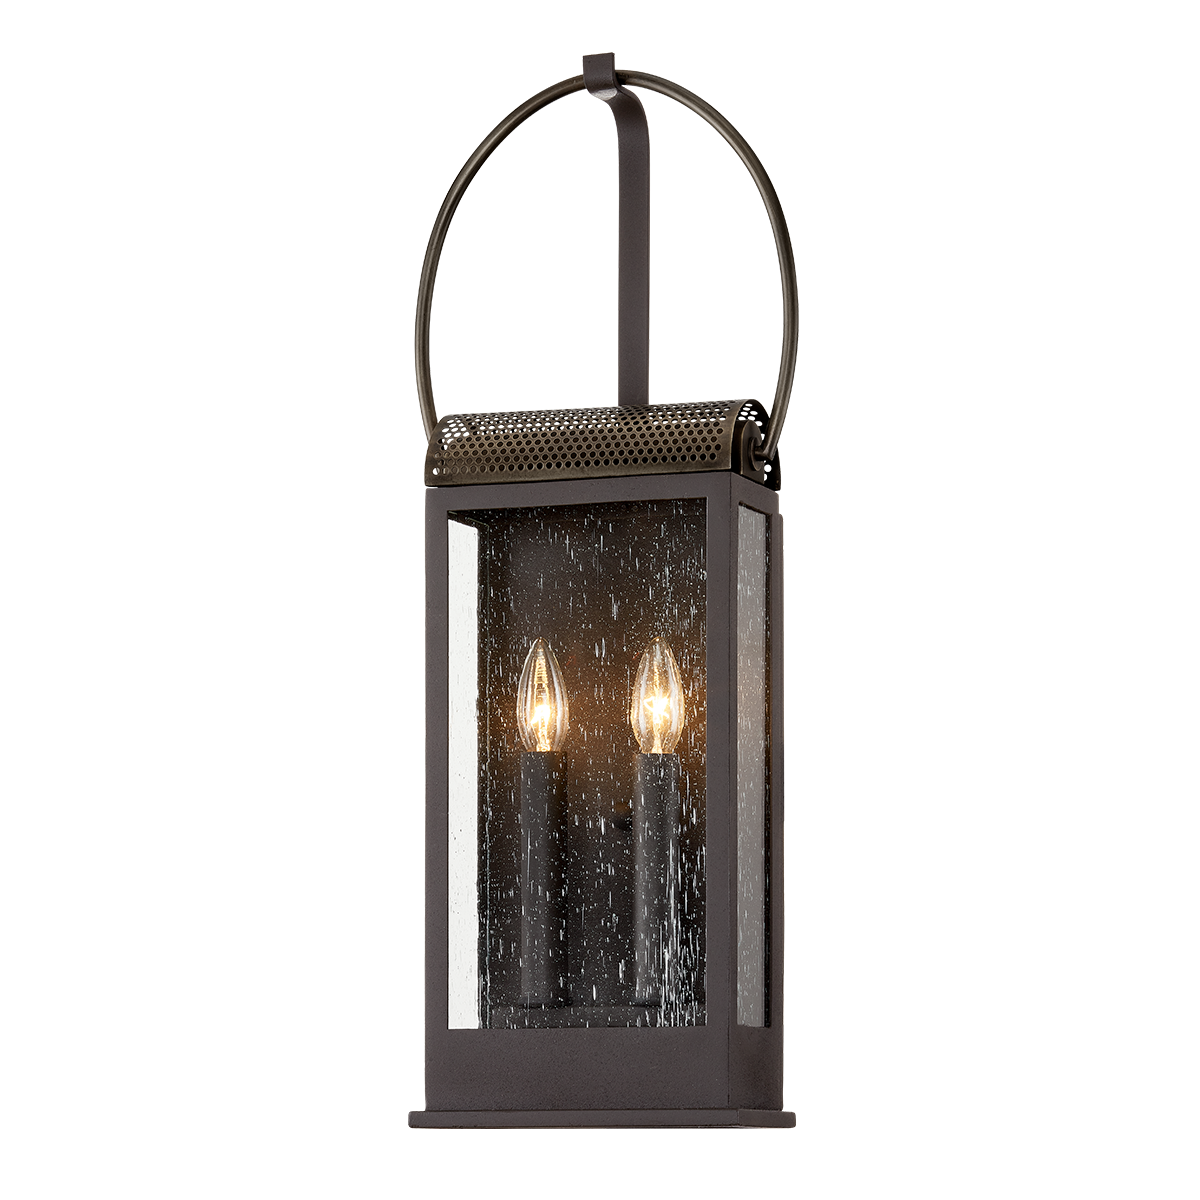 Troy Lighting HOLMES 2LT WALL B7422 Outdoor l Wall Troy Lighting BRONZE AND BRASS  